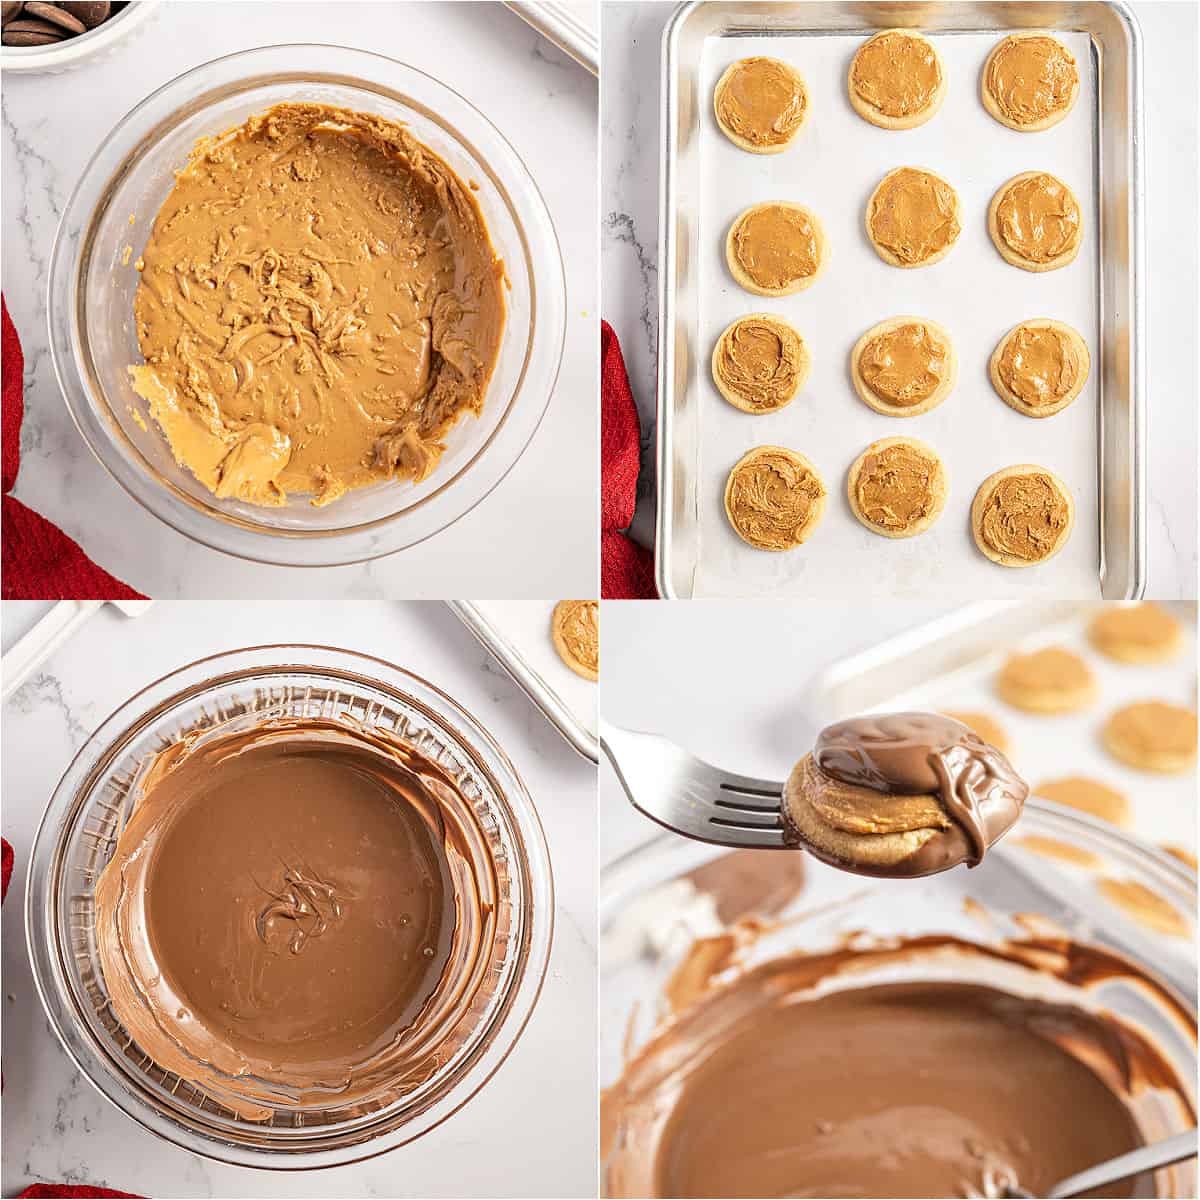 Step by step photos showing how to assemble tagalong cookies.